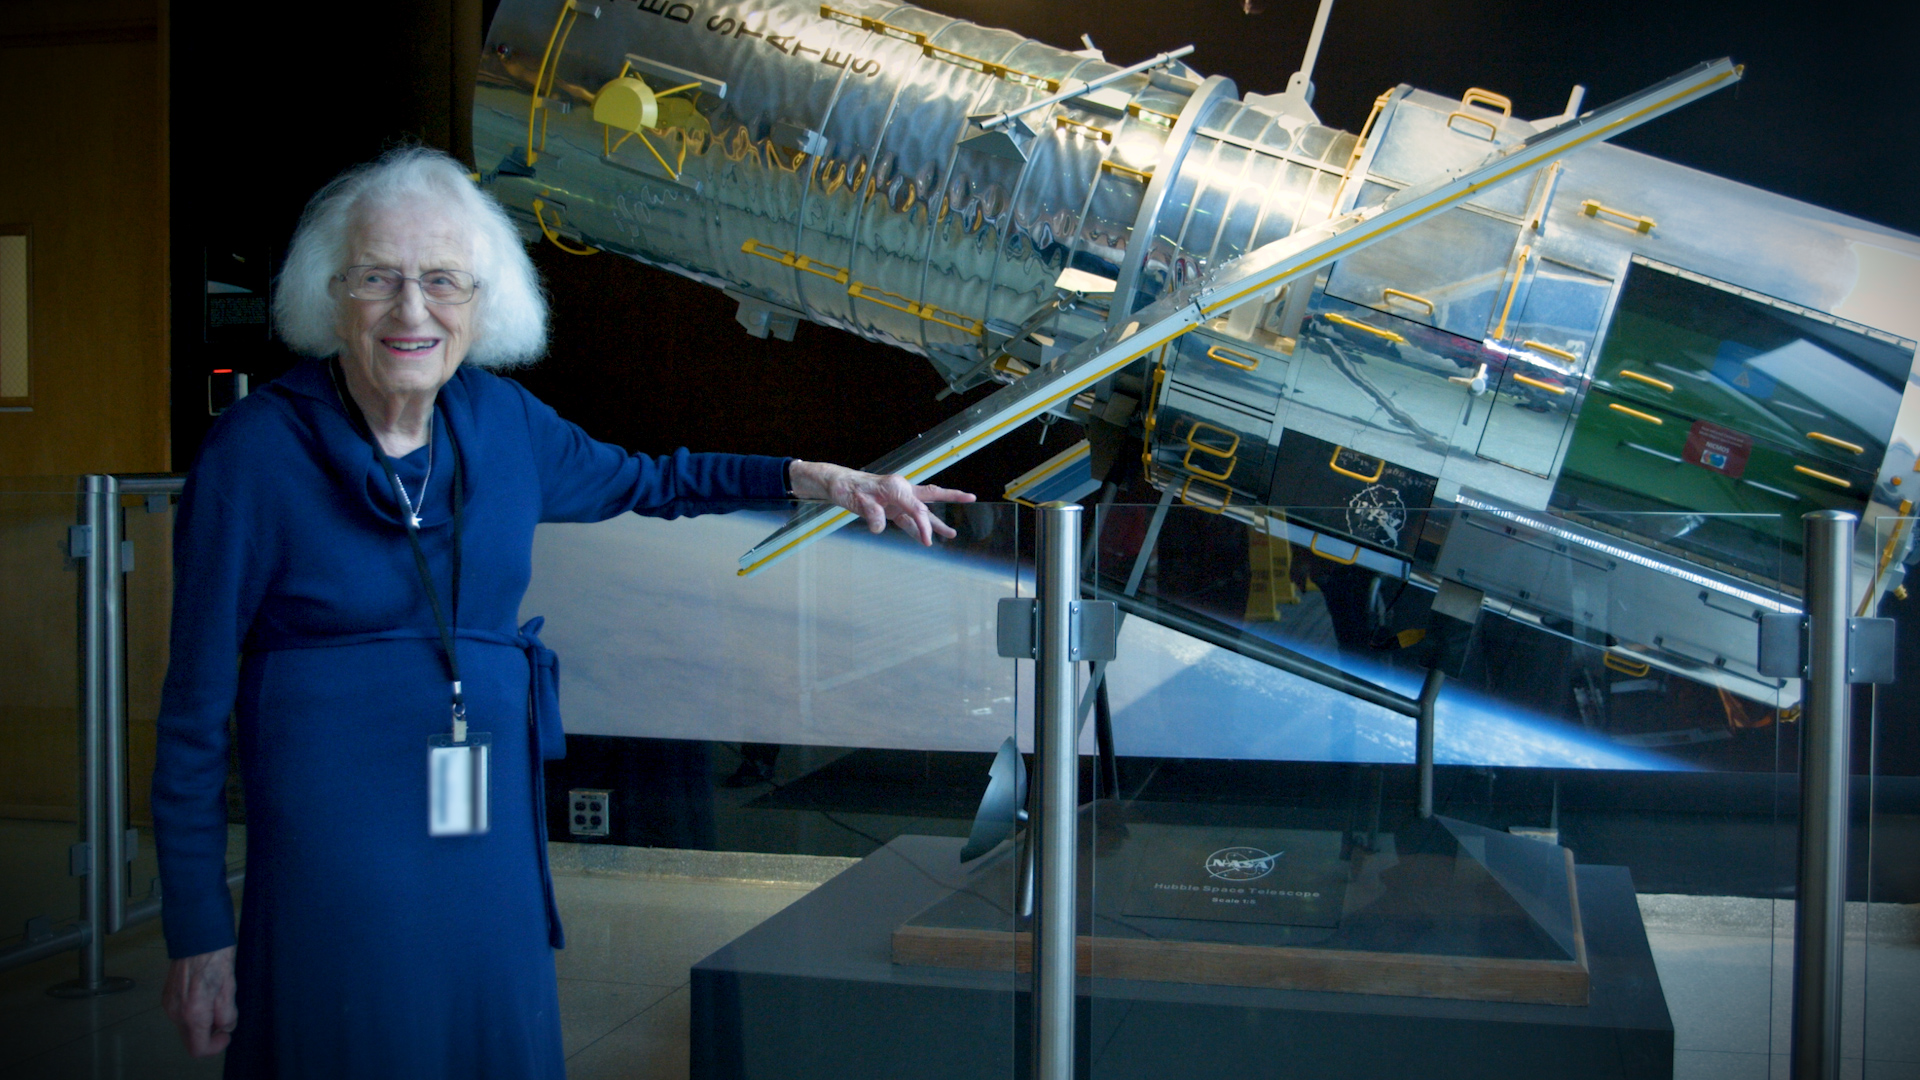 Learn about Nancy Grace Roman, her contribution to NASA missions, and how NASA has honored her.Credit: NASA's Goddard Space Flight CenterMusic: "Rising Tides" from Universal Production MusicWatch this video on the NASA Goddard YouTube channel.Complete transcript available.